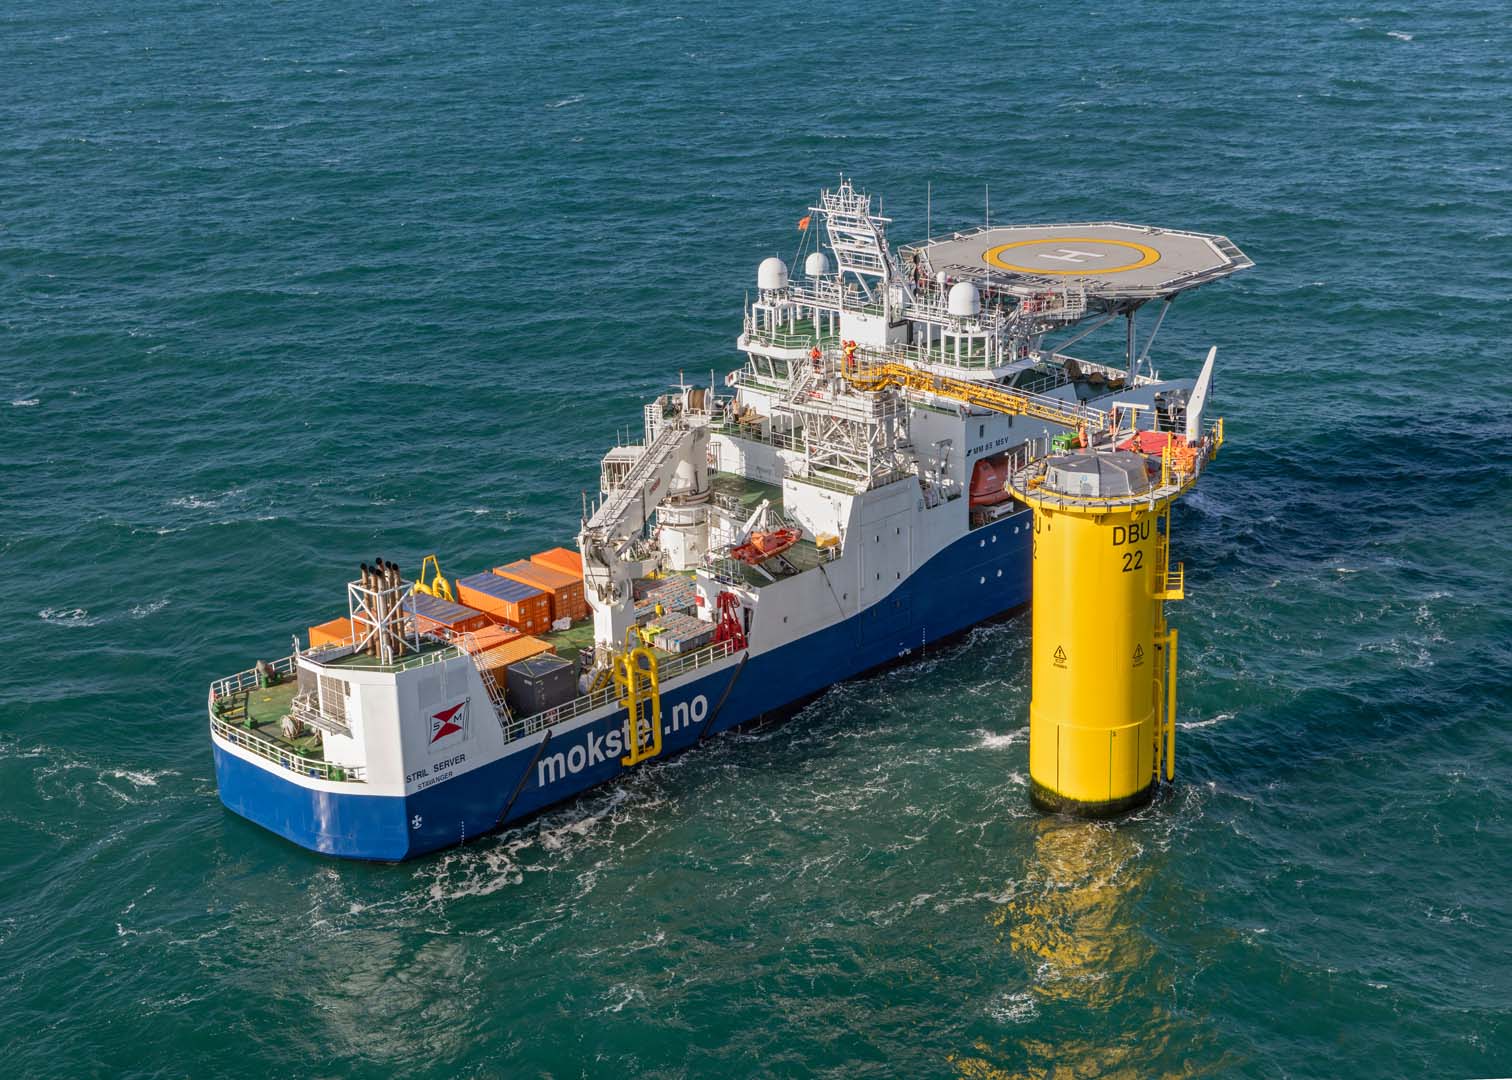 A photo of the Stril Server vessel at an offshore wind turbine foundation